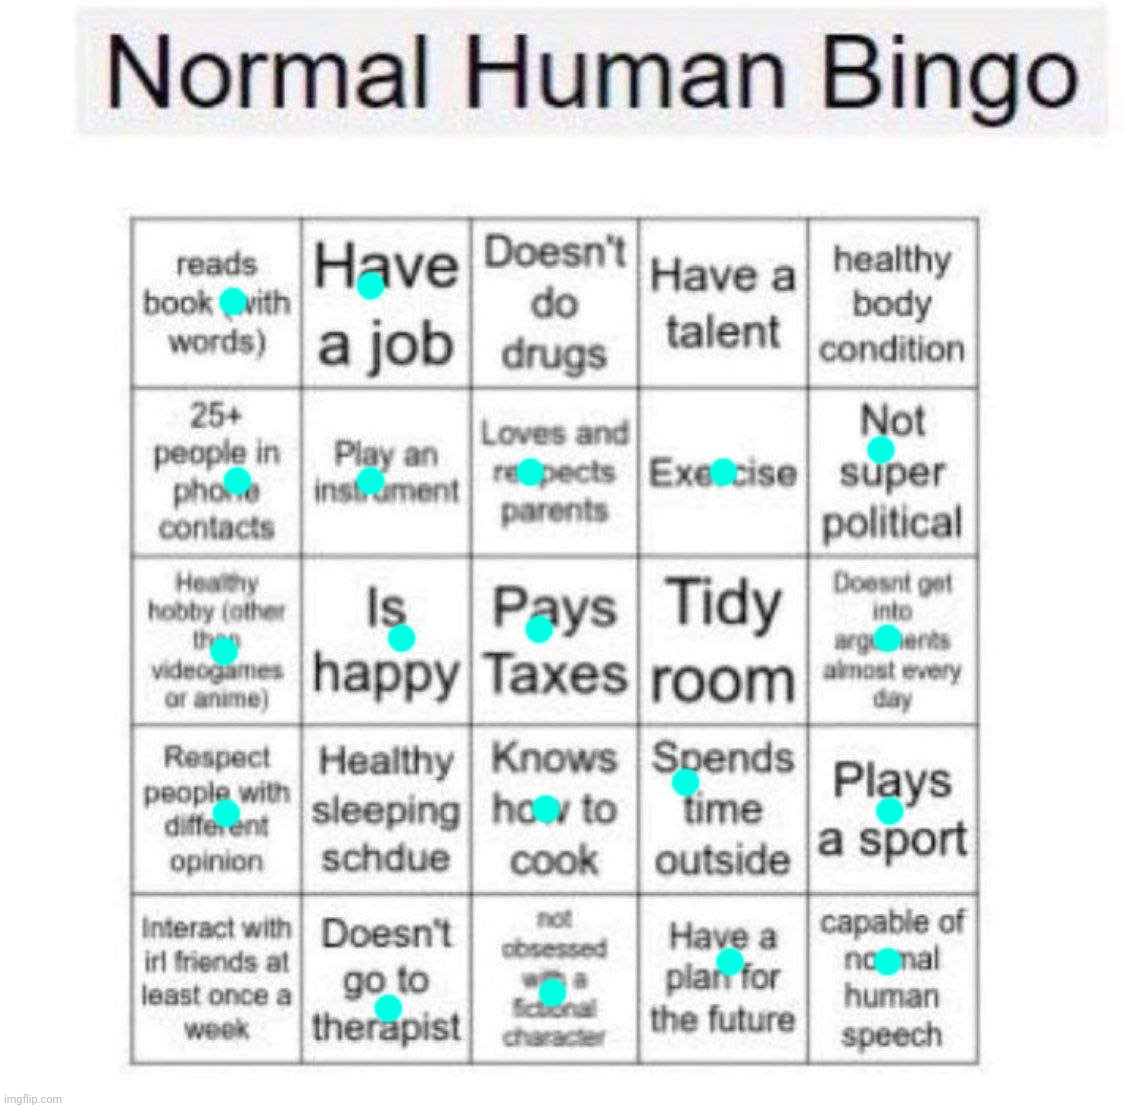 So anyways I'll be back have school to do | image tagged in normal human bingo | made w/ Imgflip meme maker